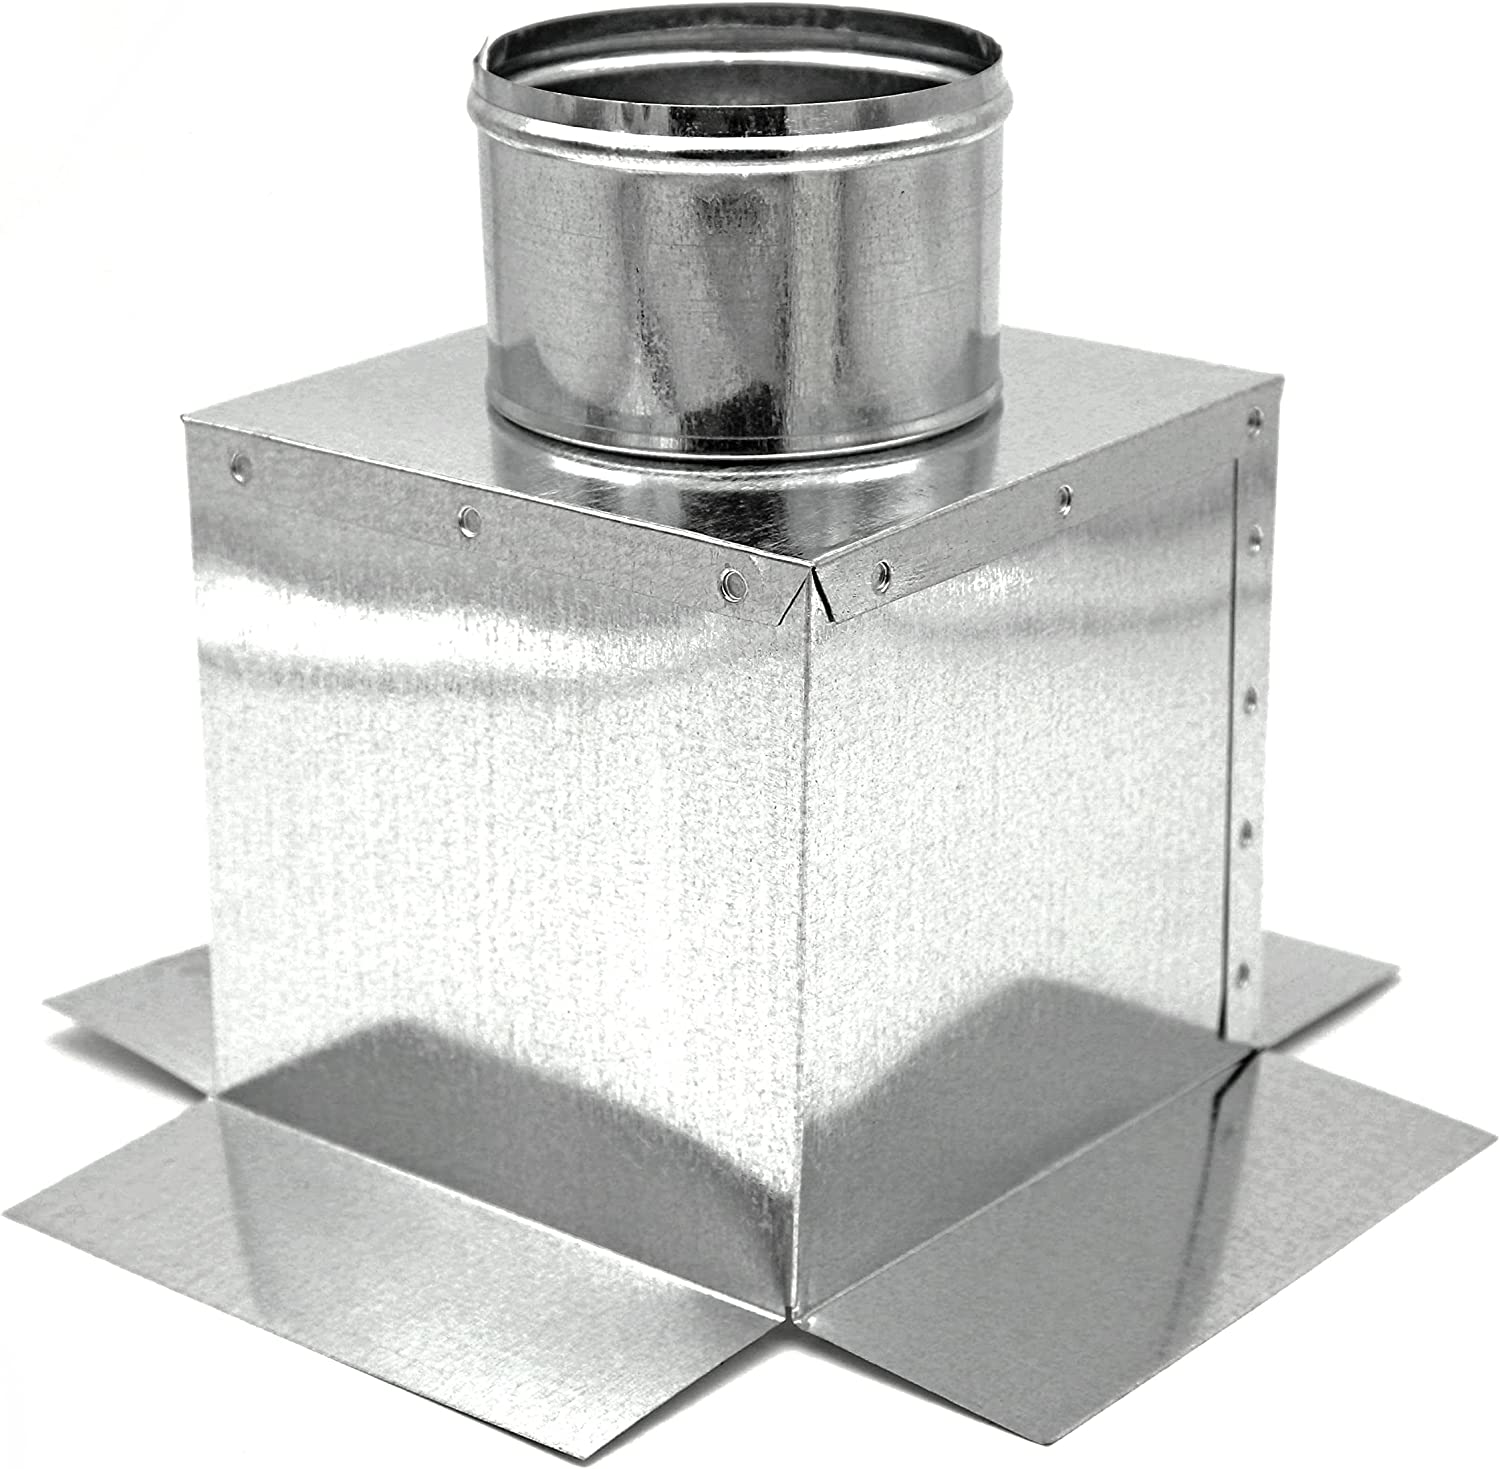 HVAC Plenum Ceiling Box | Top Ceiling Box | 8" X 8" X 7" Galvanized Steel Metal Ceiling Box is Compatible with Duct 7"